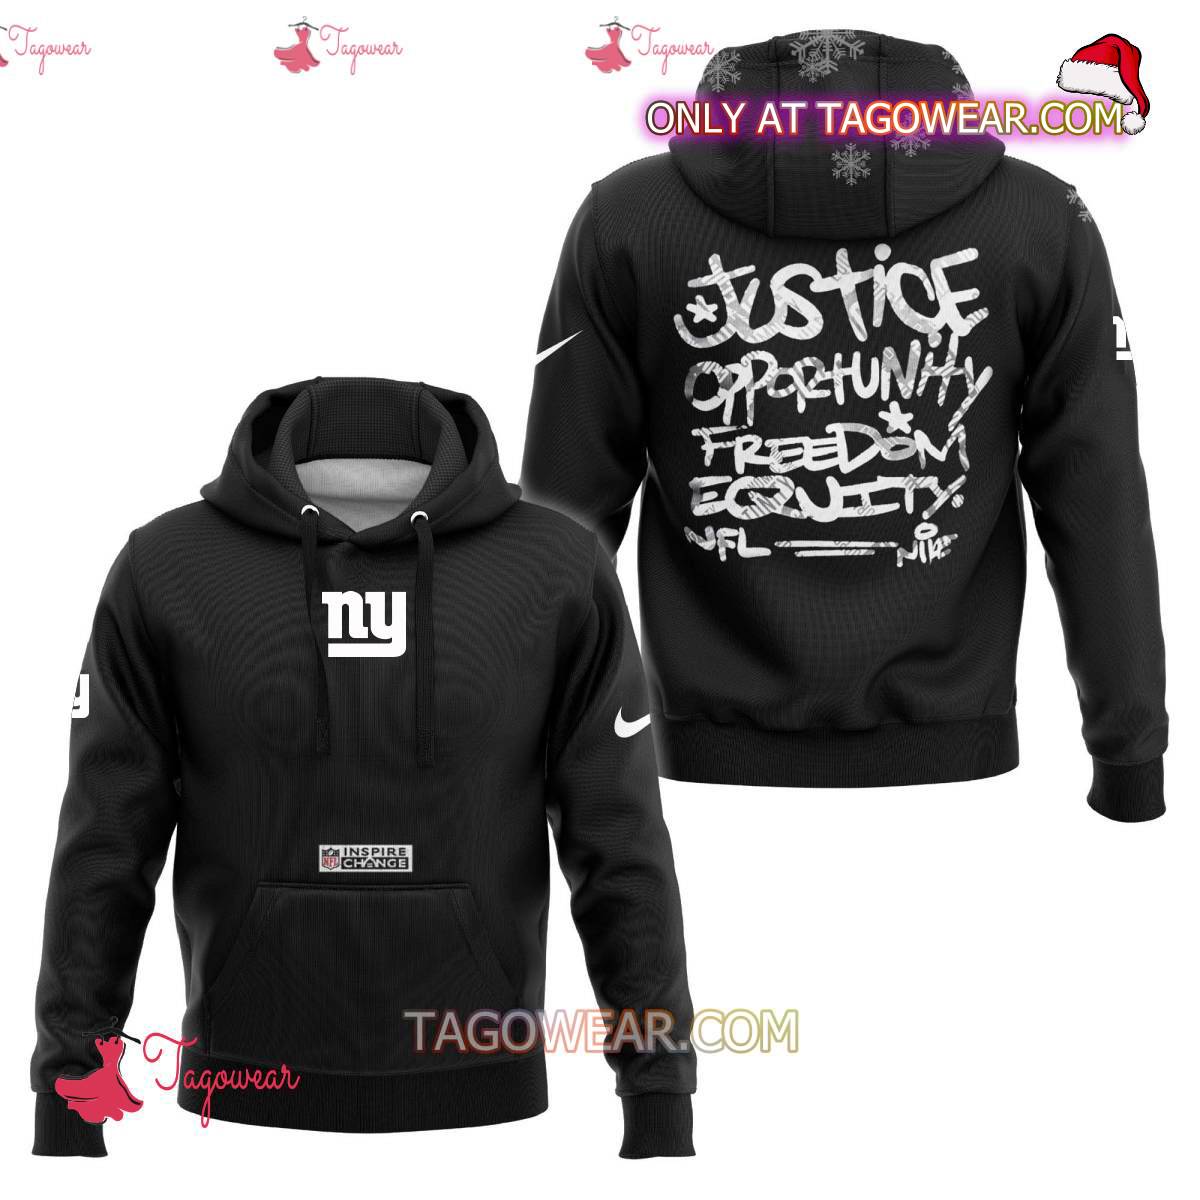 New York Giants NFL Inspire Change Justice Opportunity Equality Freedom Hoodie